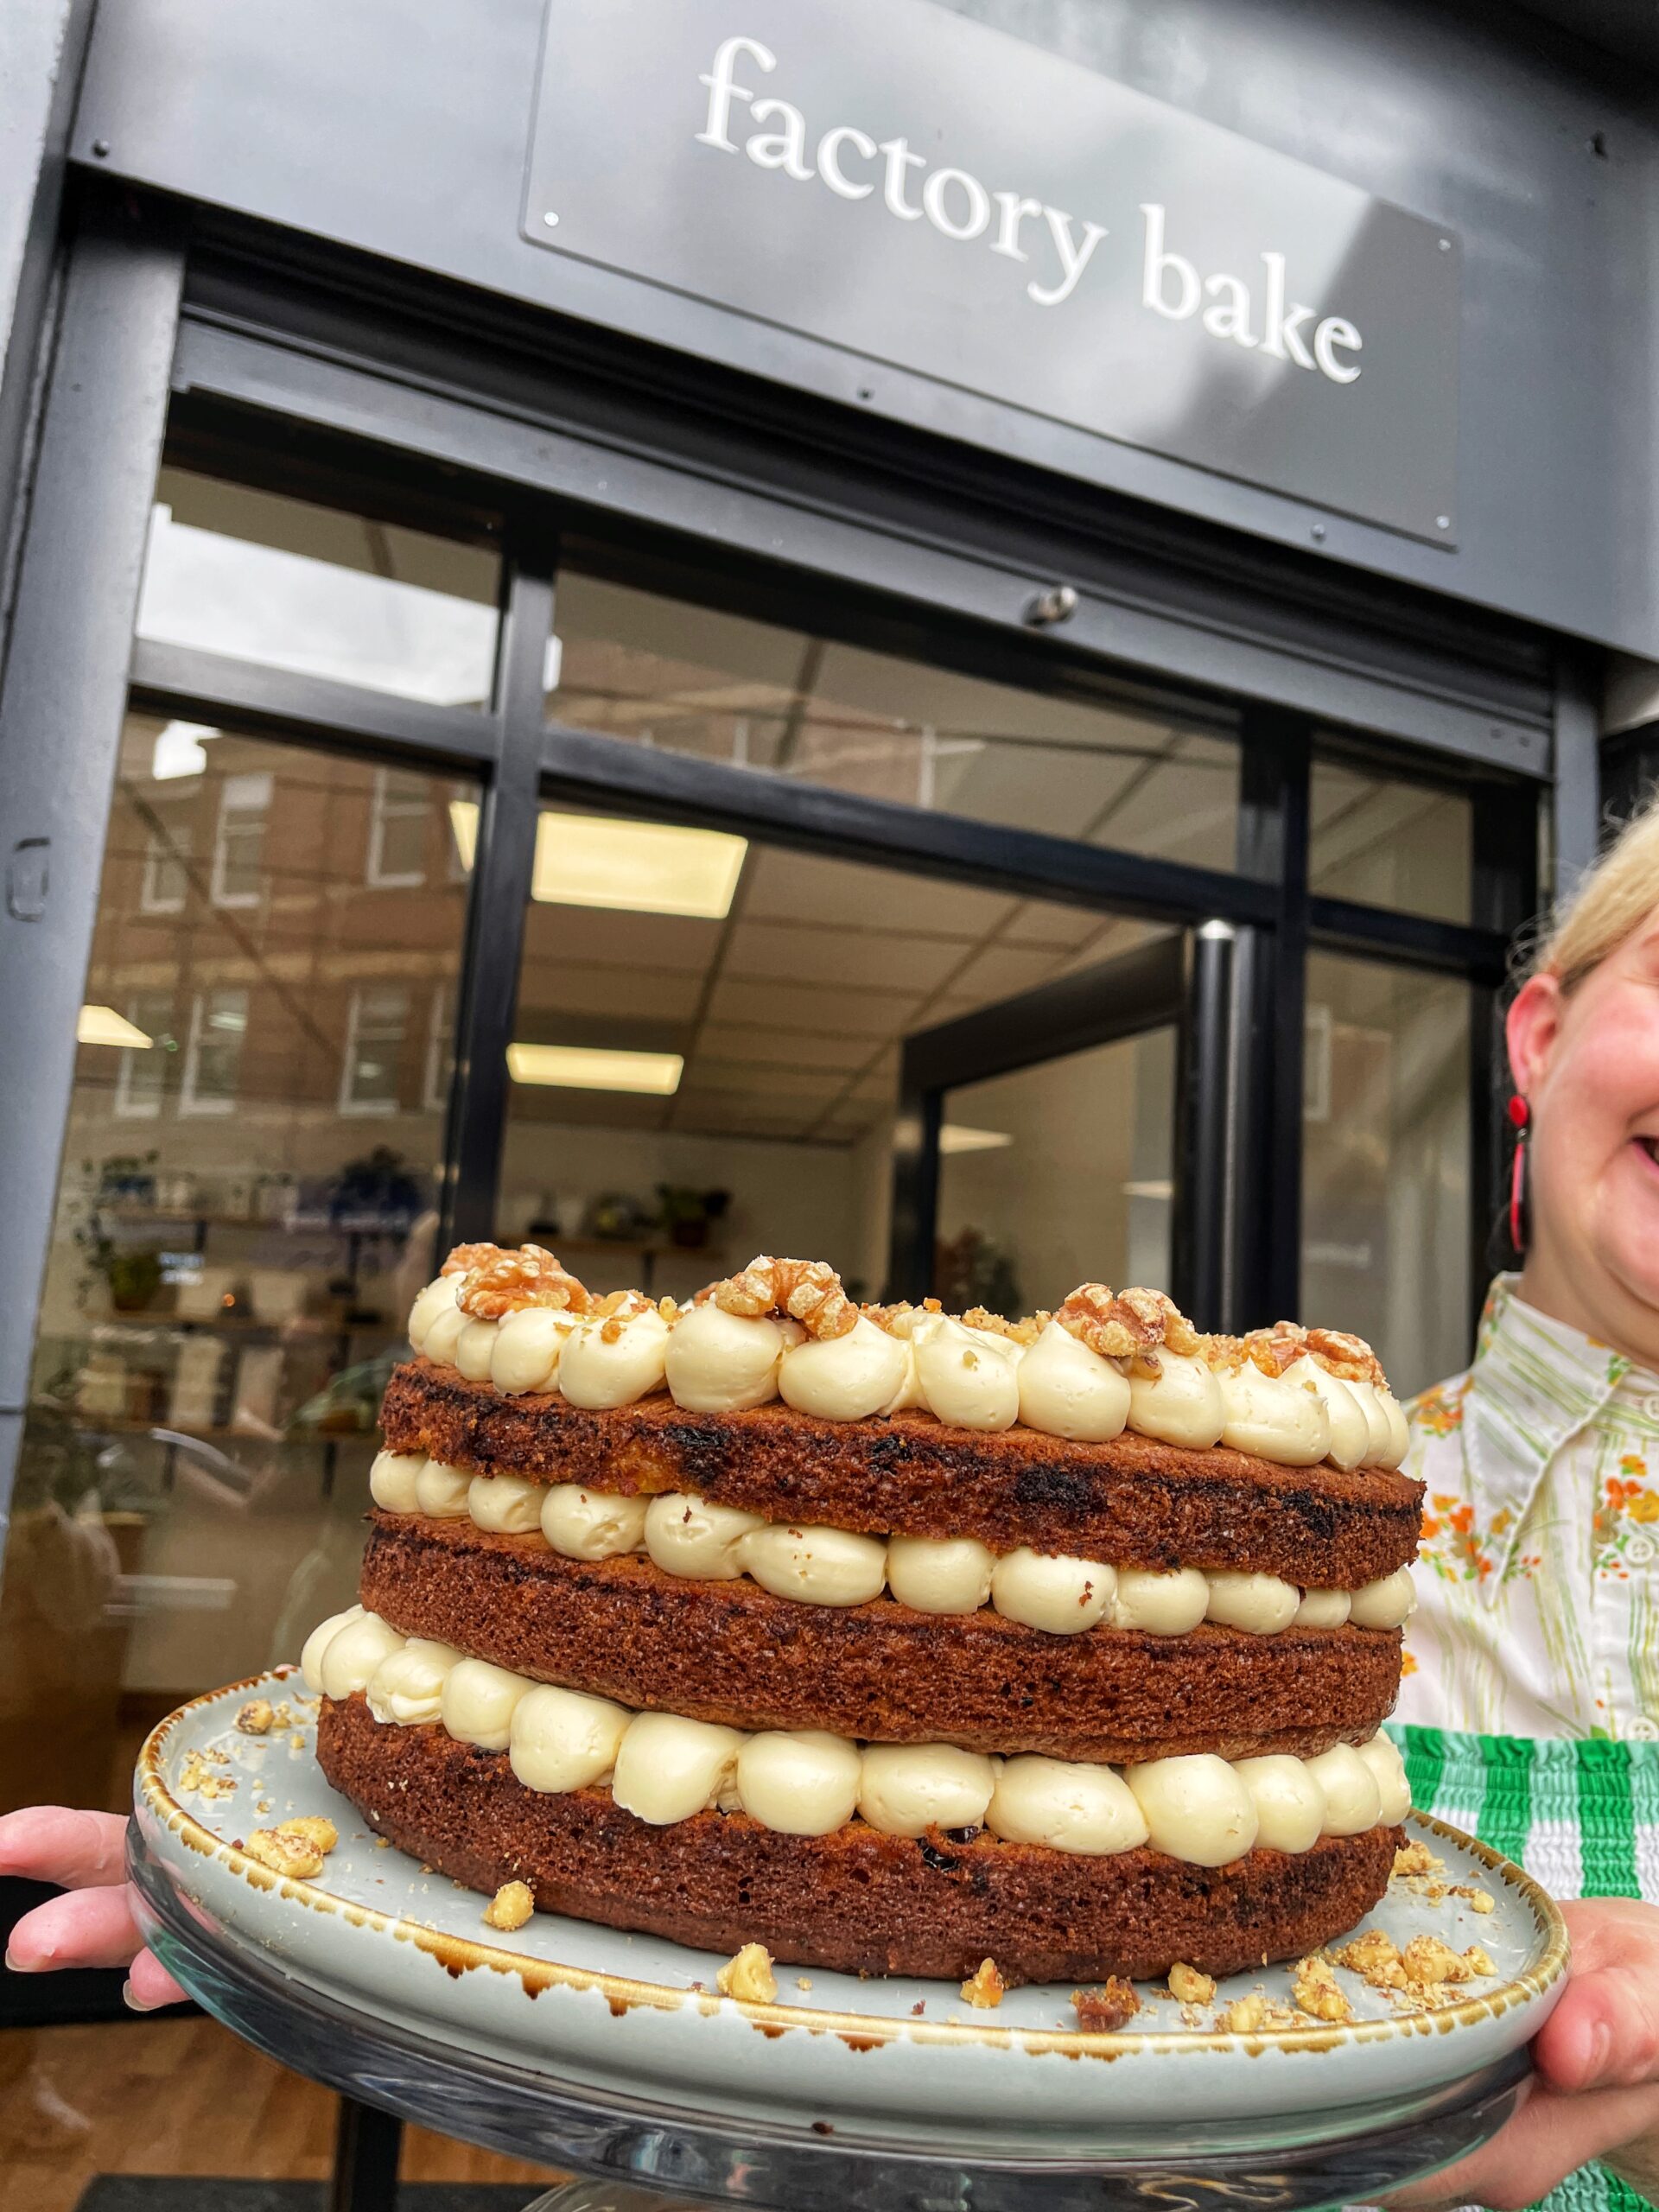 Factory Bake in Manchester has responded to its first one-star review